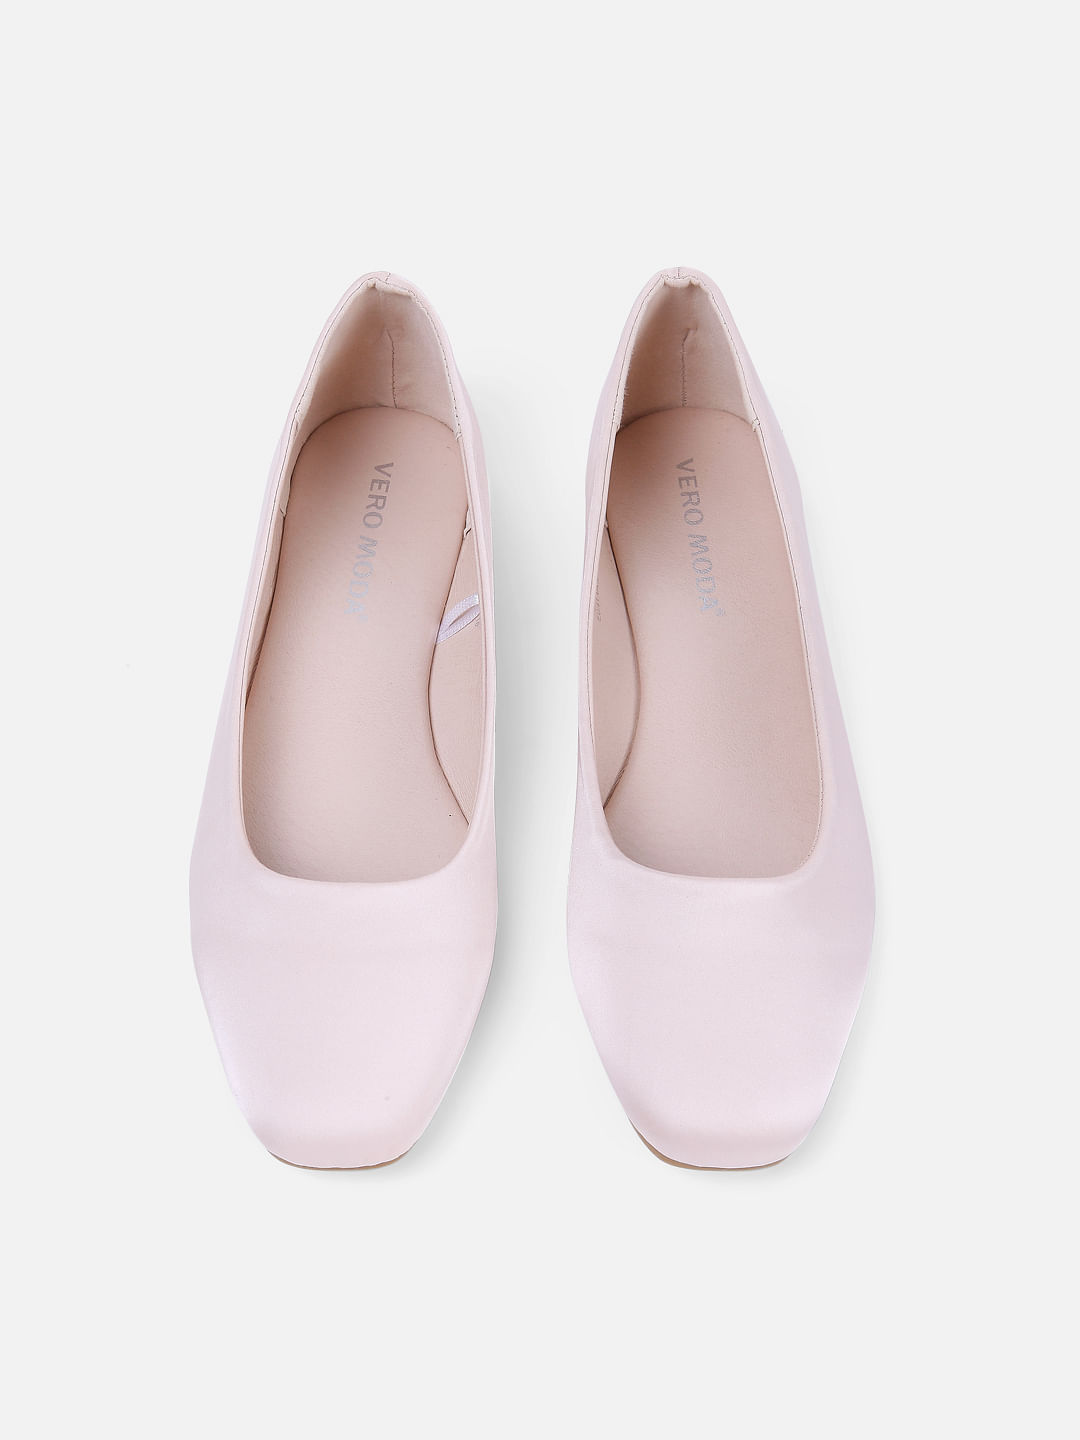 How to Pump Up Your Style with Women's Ballet Flats - Oliver Cabell